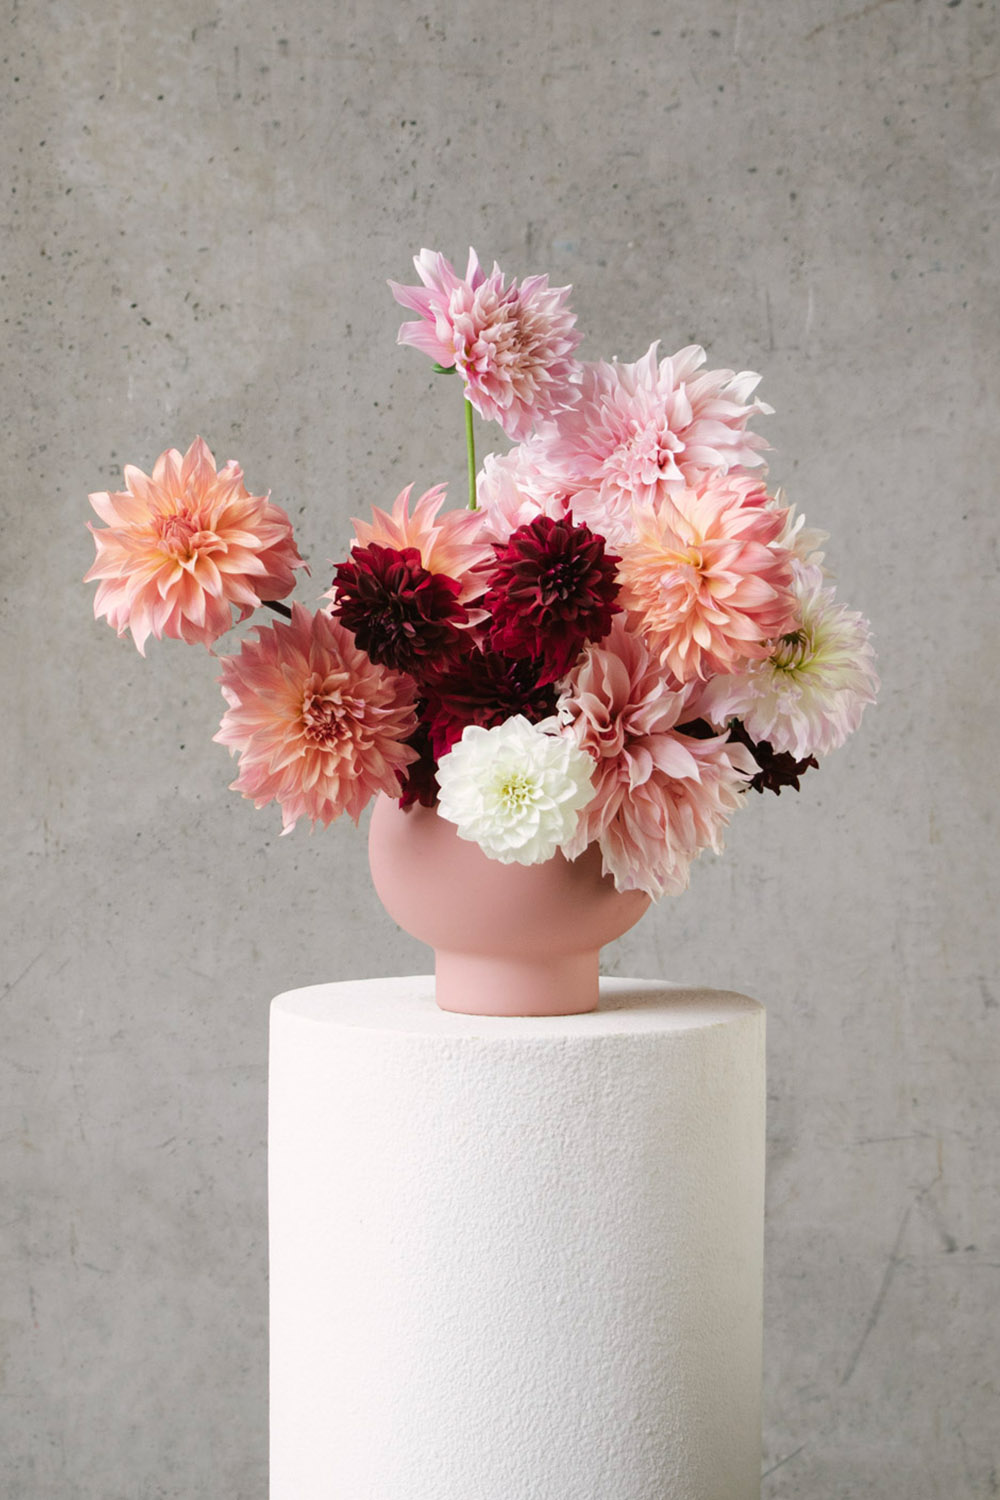 A Lush ouquet of Flowers with Pink Hues by Flowers Vasette